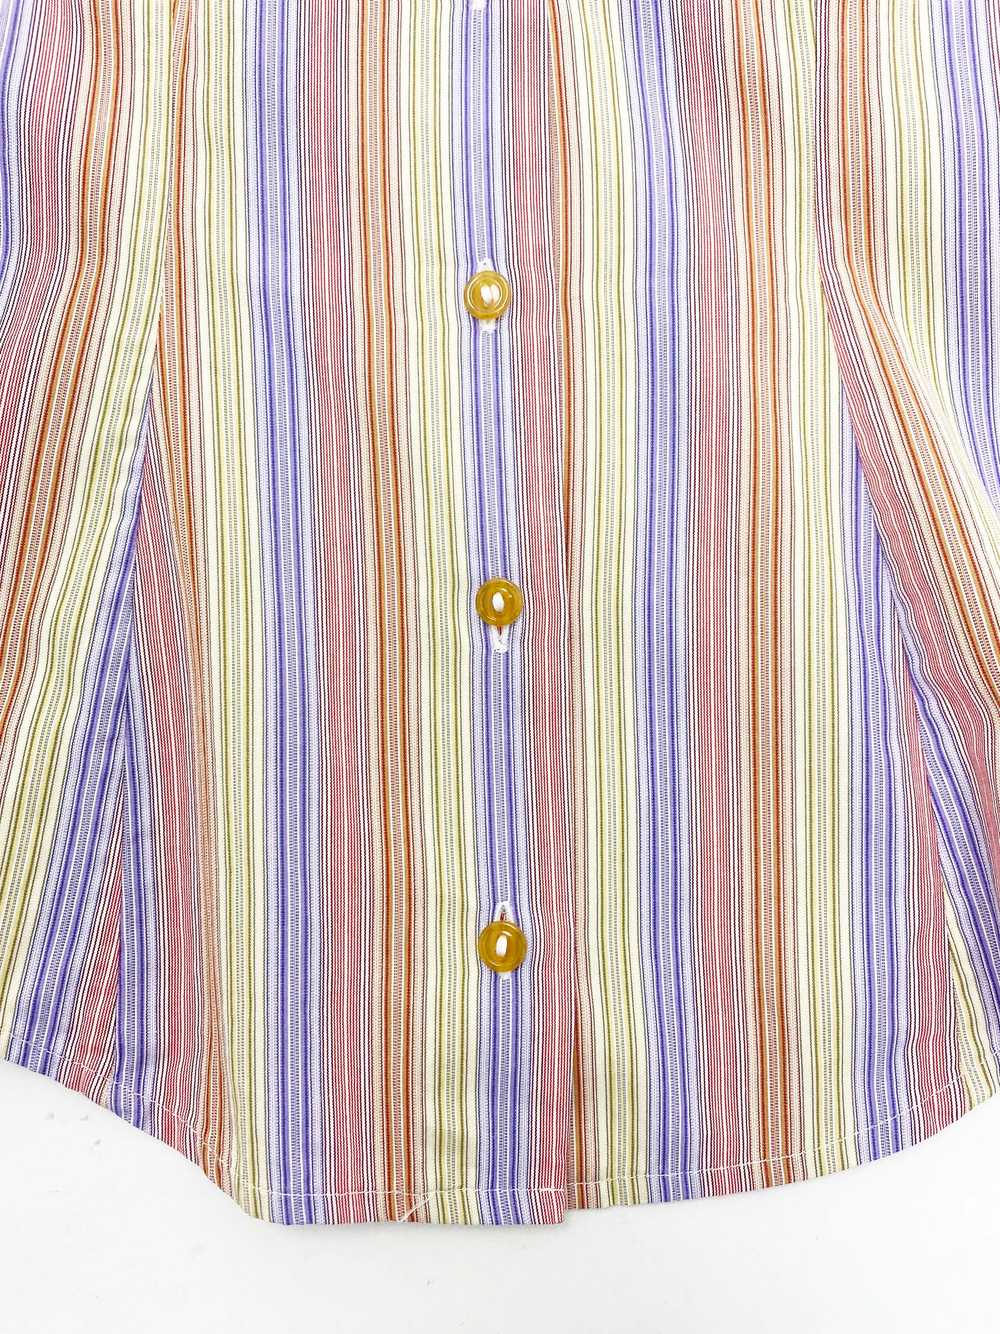 Vivienne Westwood 90s puff sleeve striped shirt - image 5